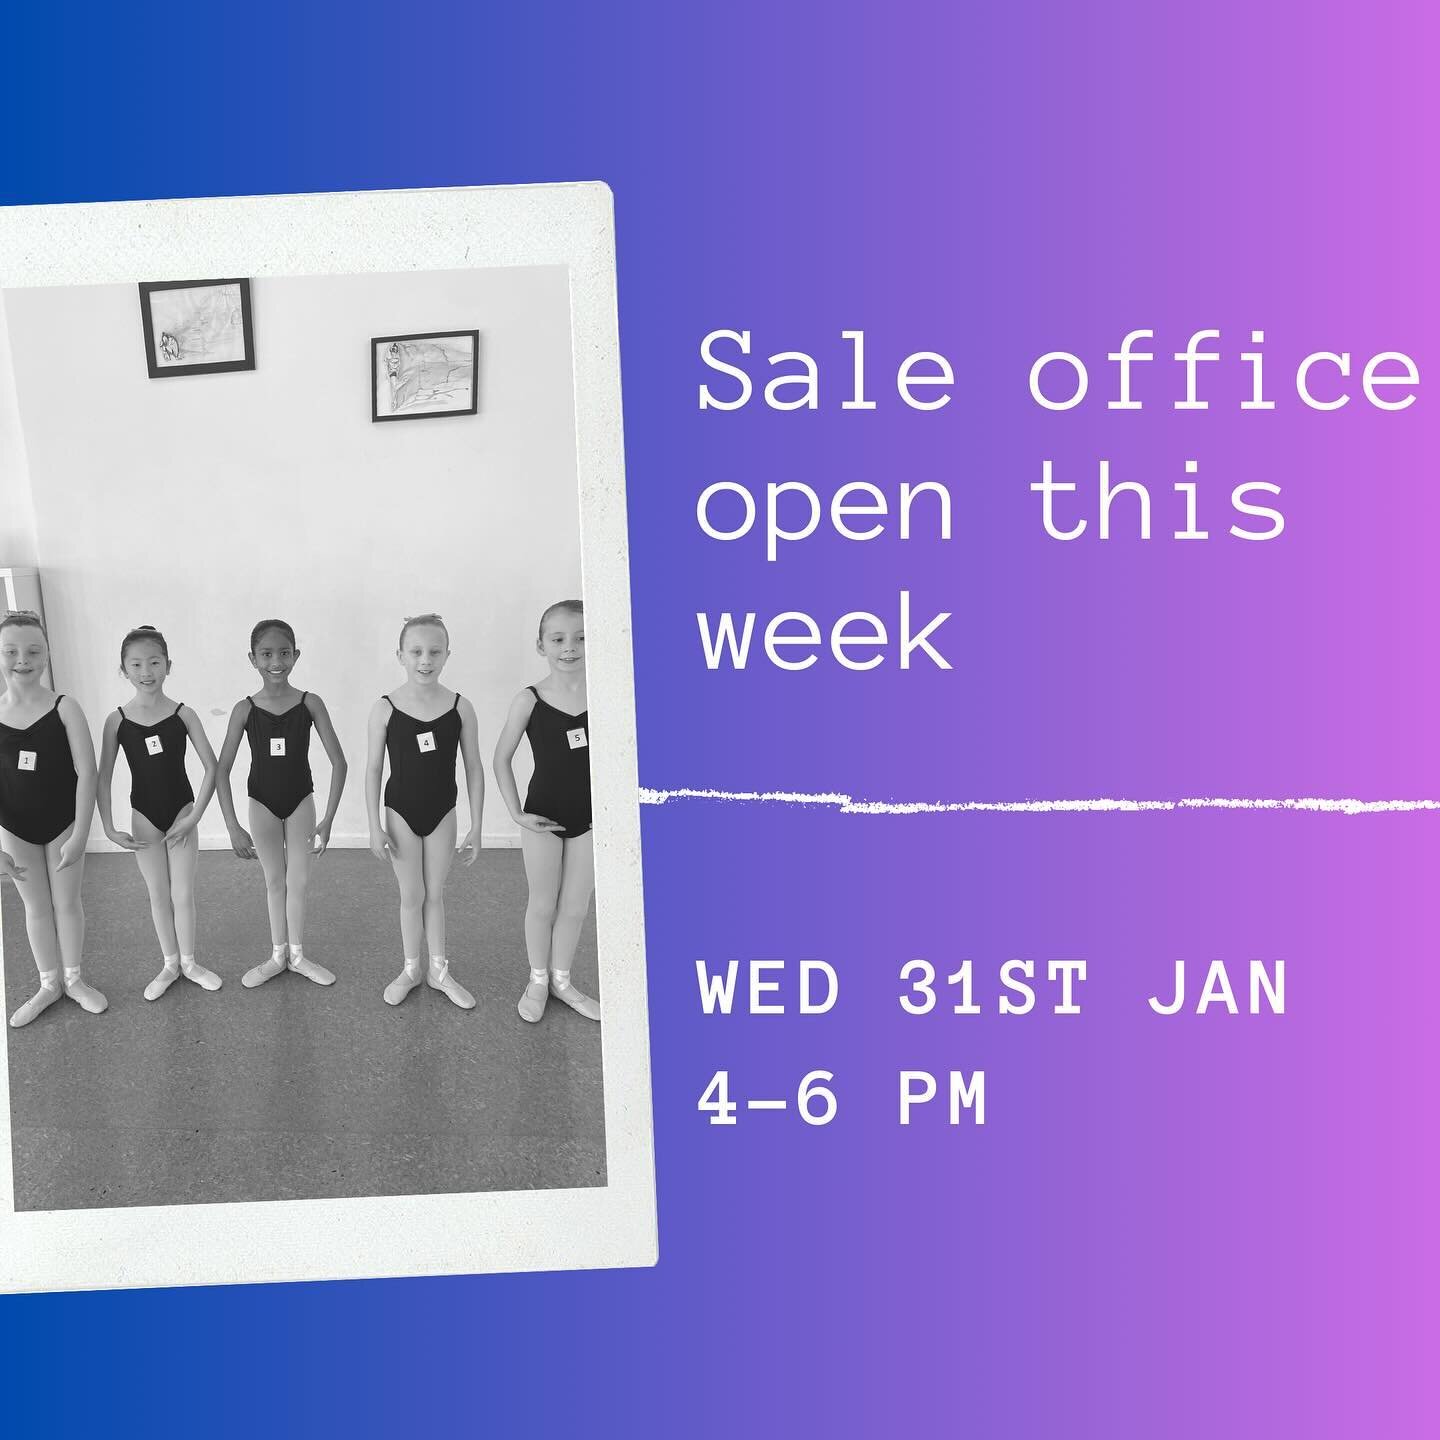 Do you need to -
&bull; try on dancewear or shoes?
&bull; pay a bill in person?
&bull; collect a concert USB?

Come and see us in the Sale office this Wednesday. Term 1 begins Saturday 3rd Feb! 💃💃💃